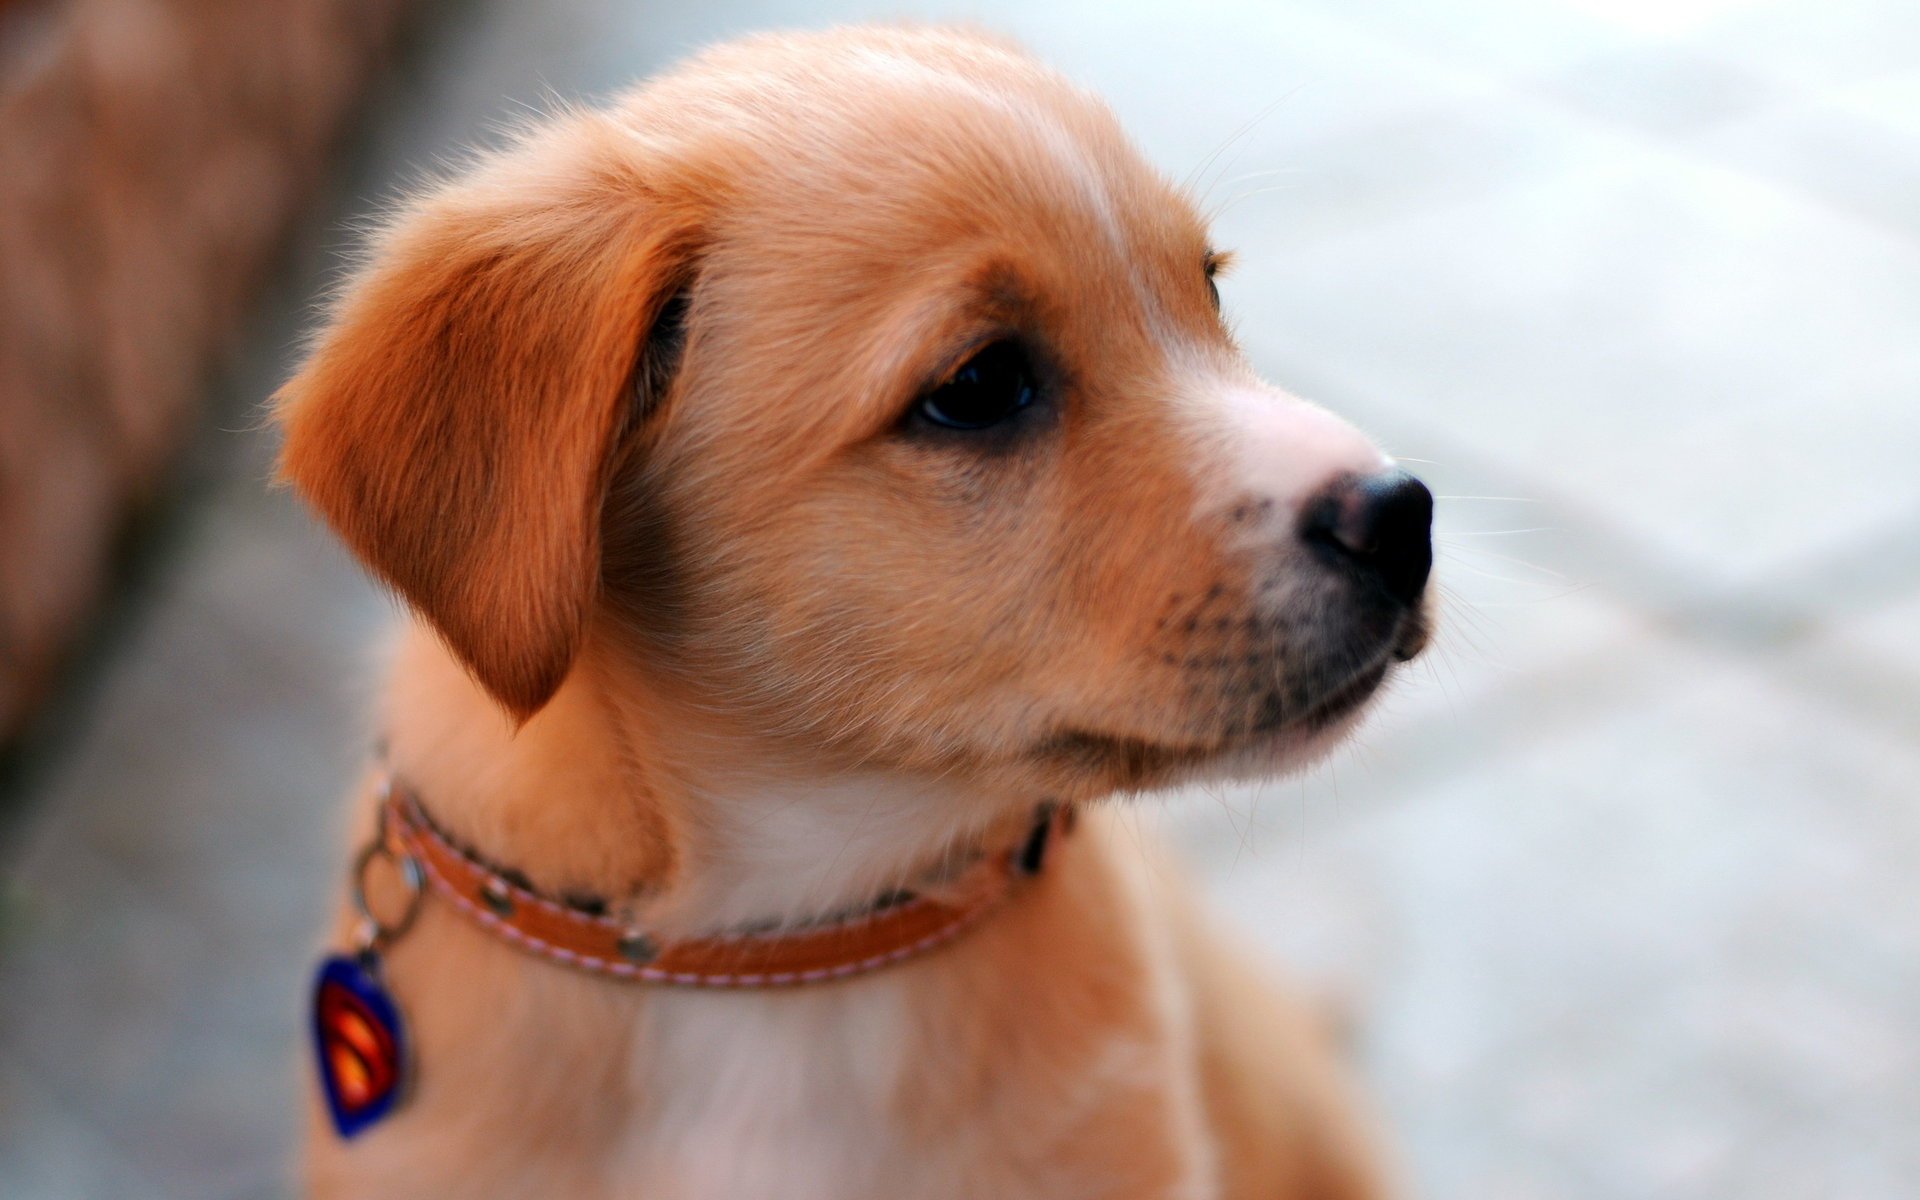 A small dog with a red collar